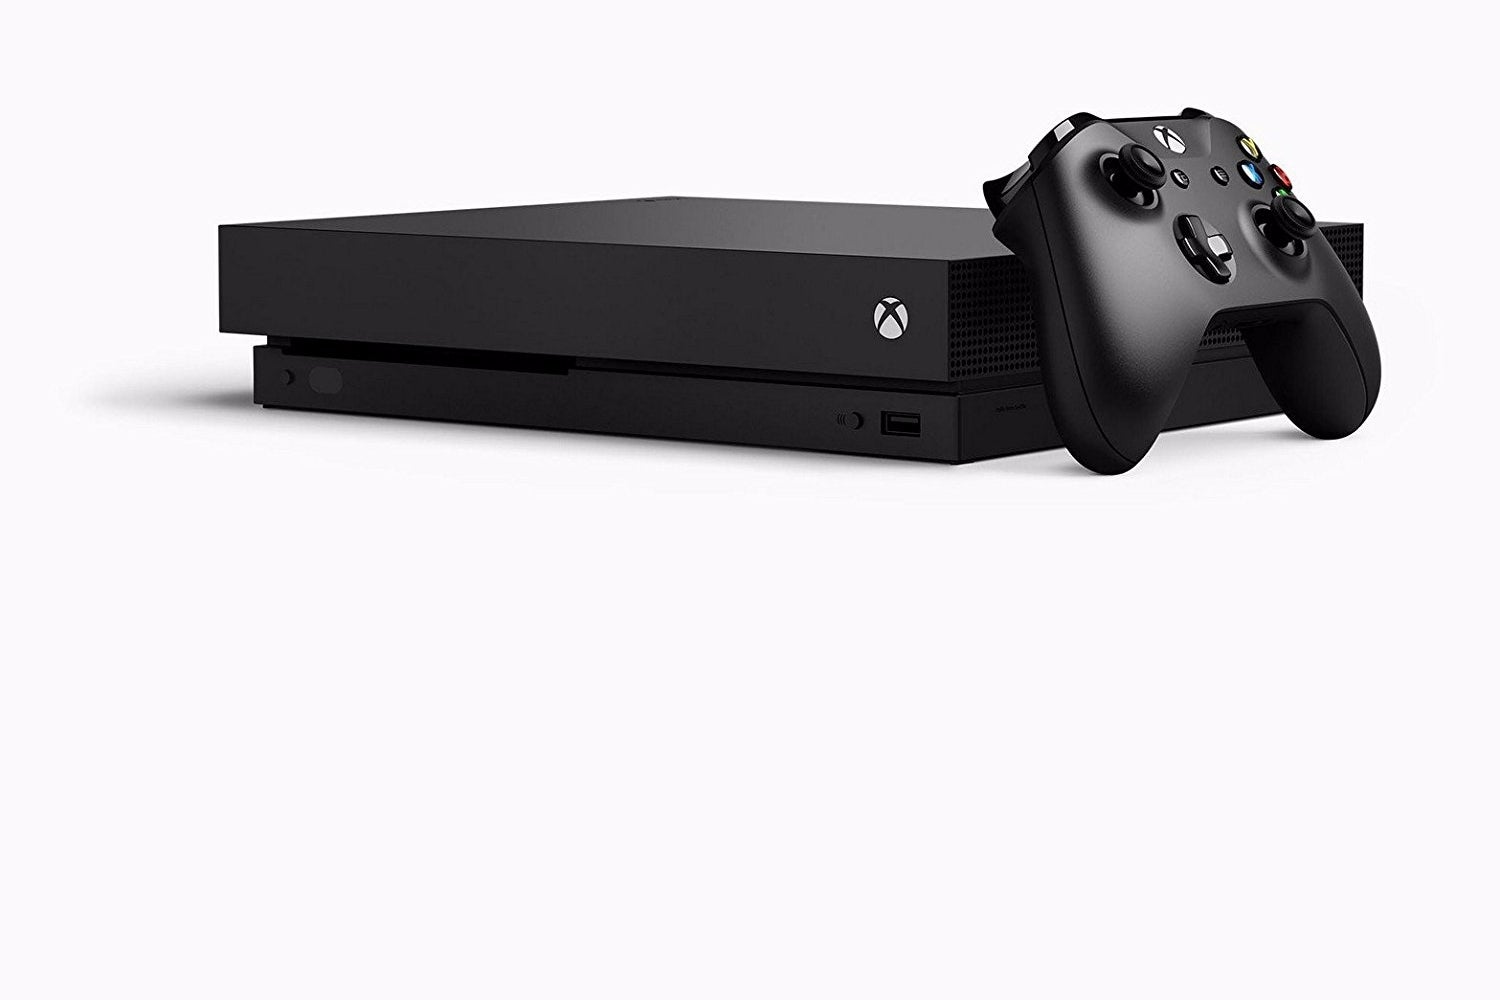 Image for Microsoft says Xbox One X is fastest-selling Xbox pre-order ever